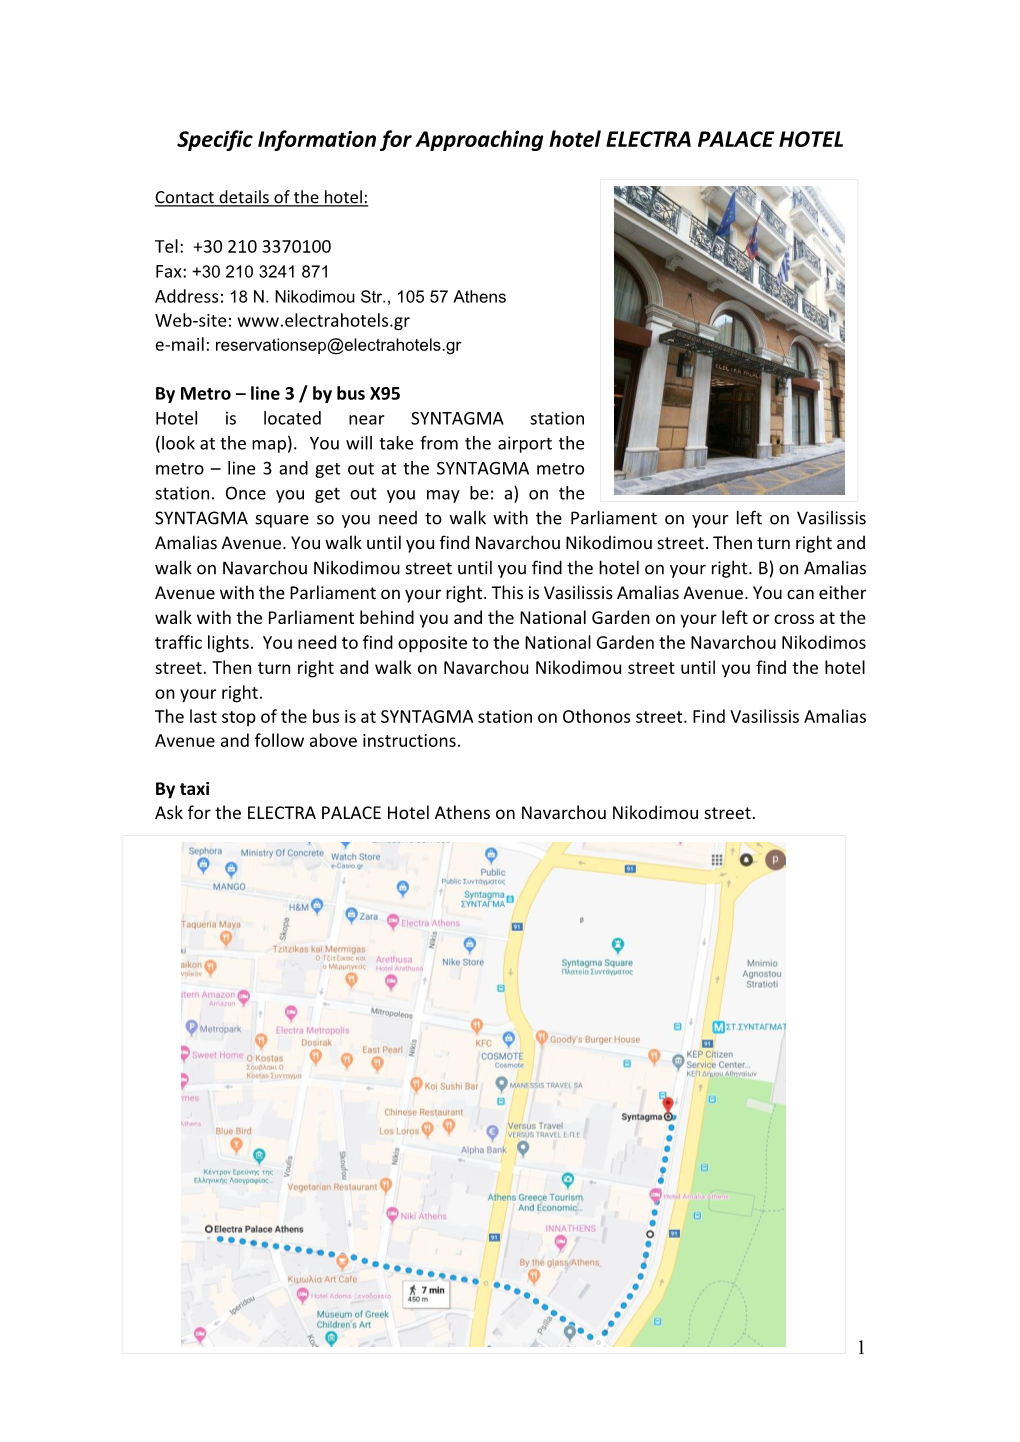 Specific Information for Approaching Hotel ELECTRA PALACE HOTEL